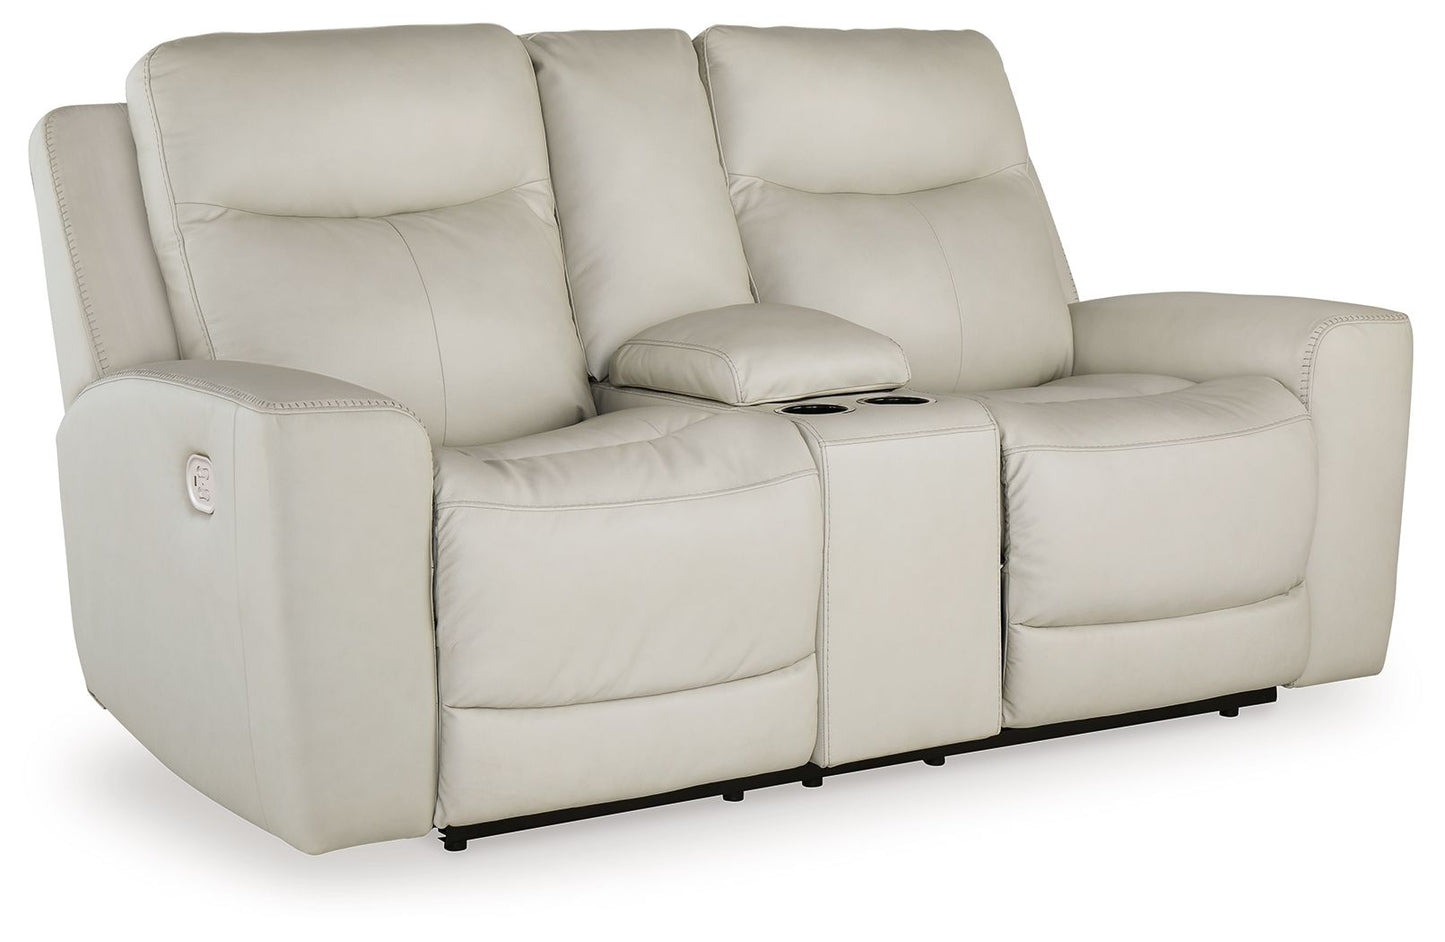 Mindanao - Coconut - Power Reclining Loveseat With Console / Adj Hdrst